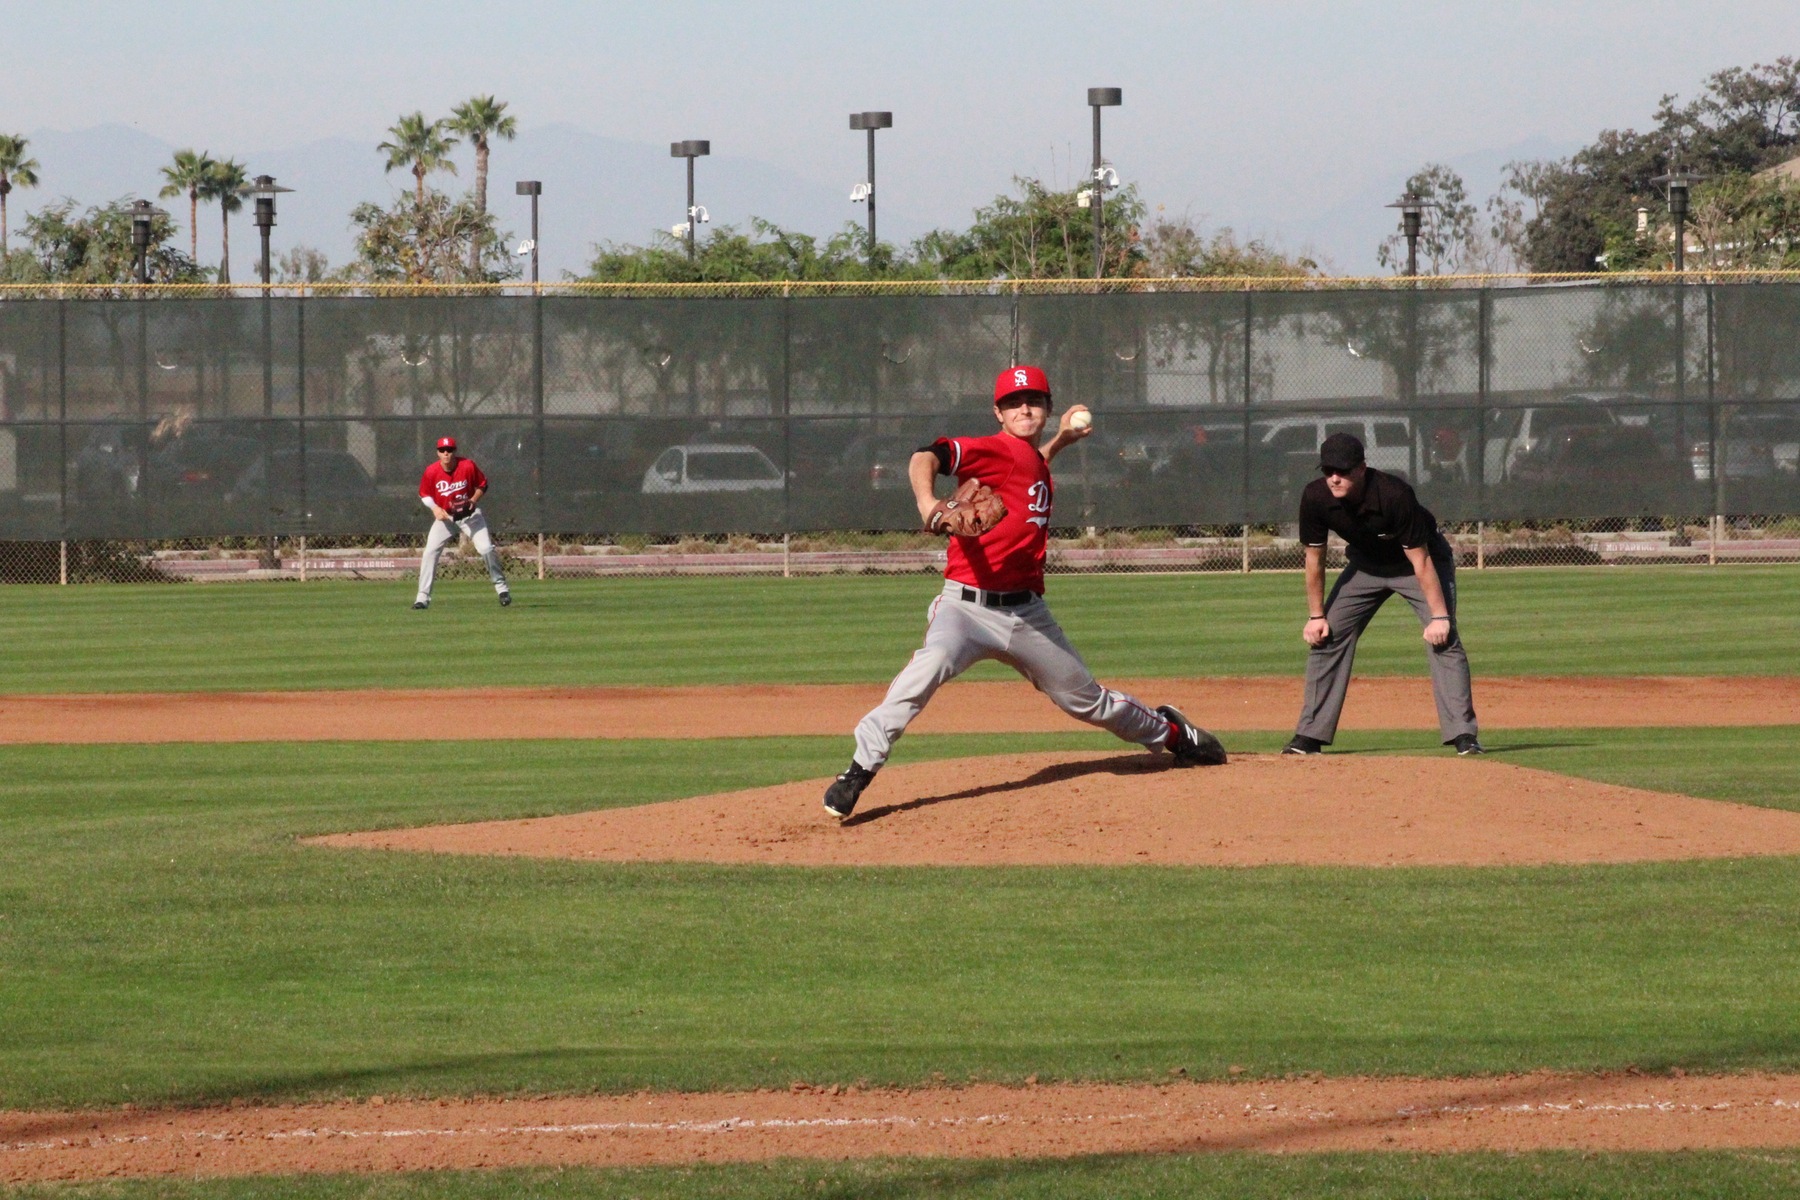 Santa Ana Stays Undefeated With 5-4 Win Over No. 8 COC